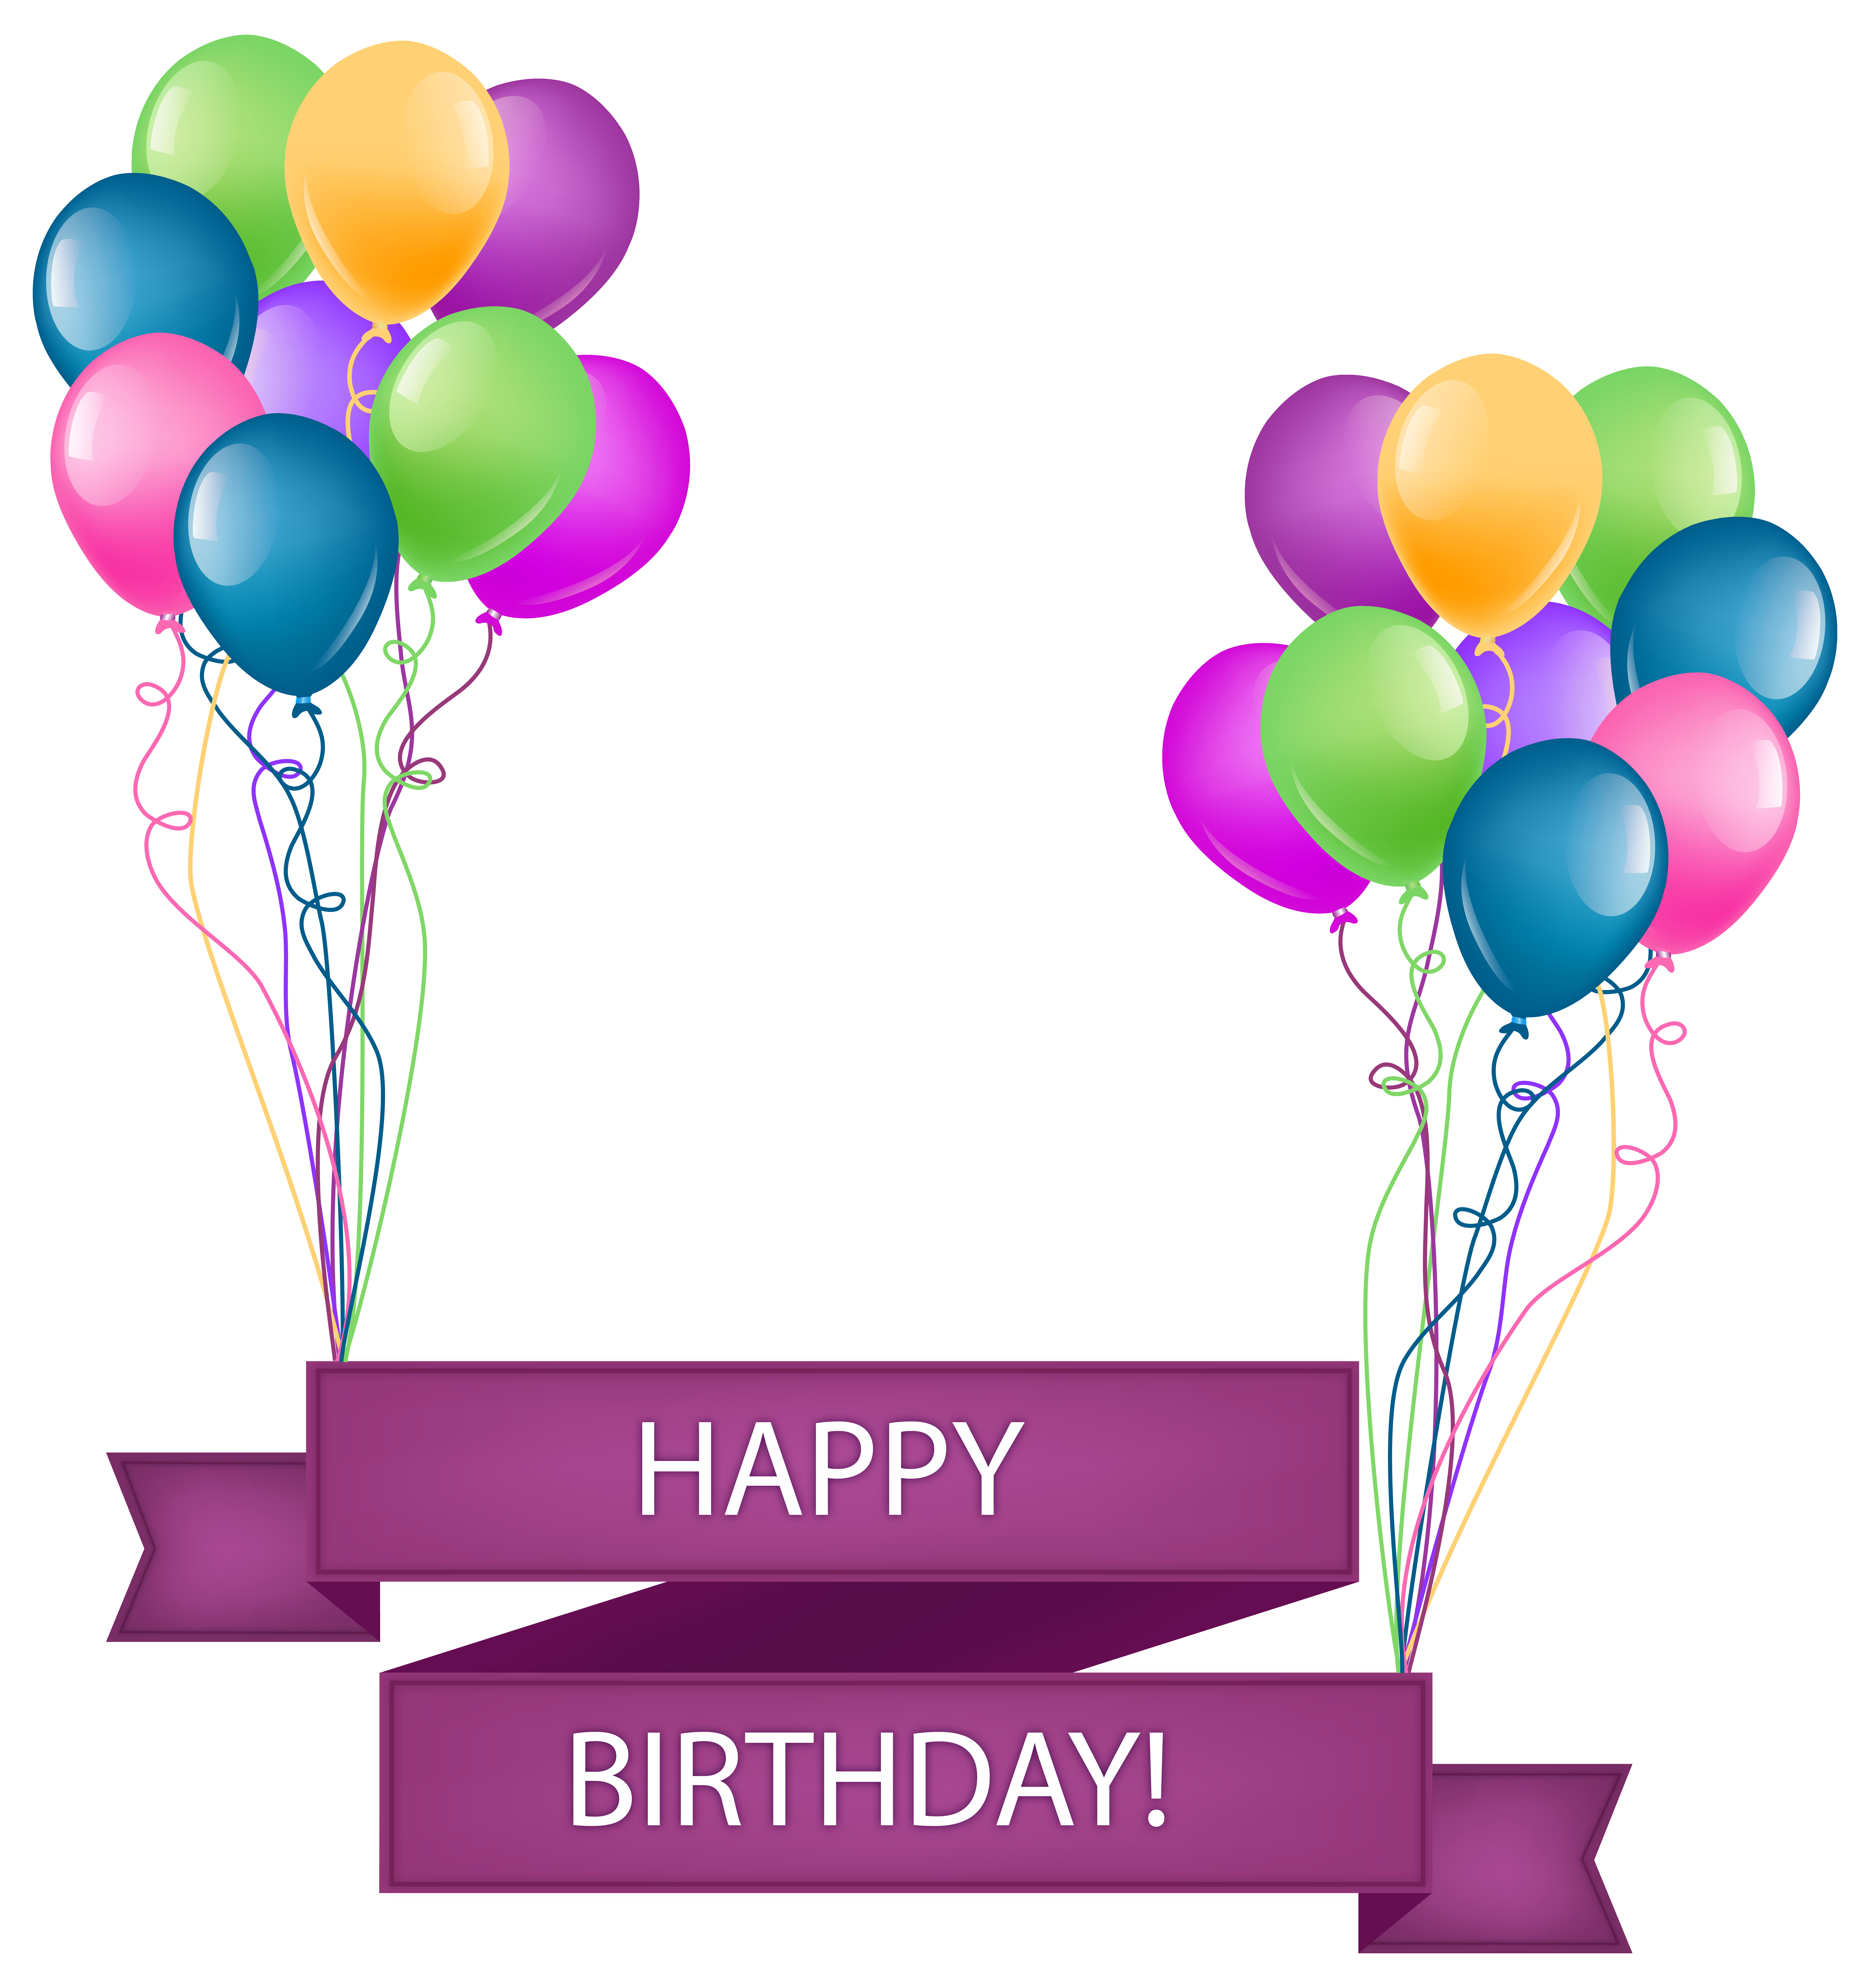 Happy Birthday Banner with Balloons Transparent PNG Clip Art Image.